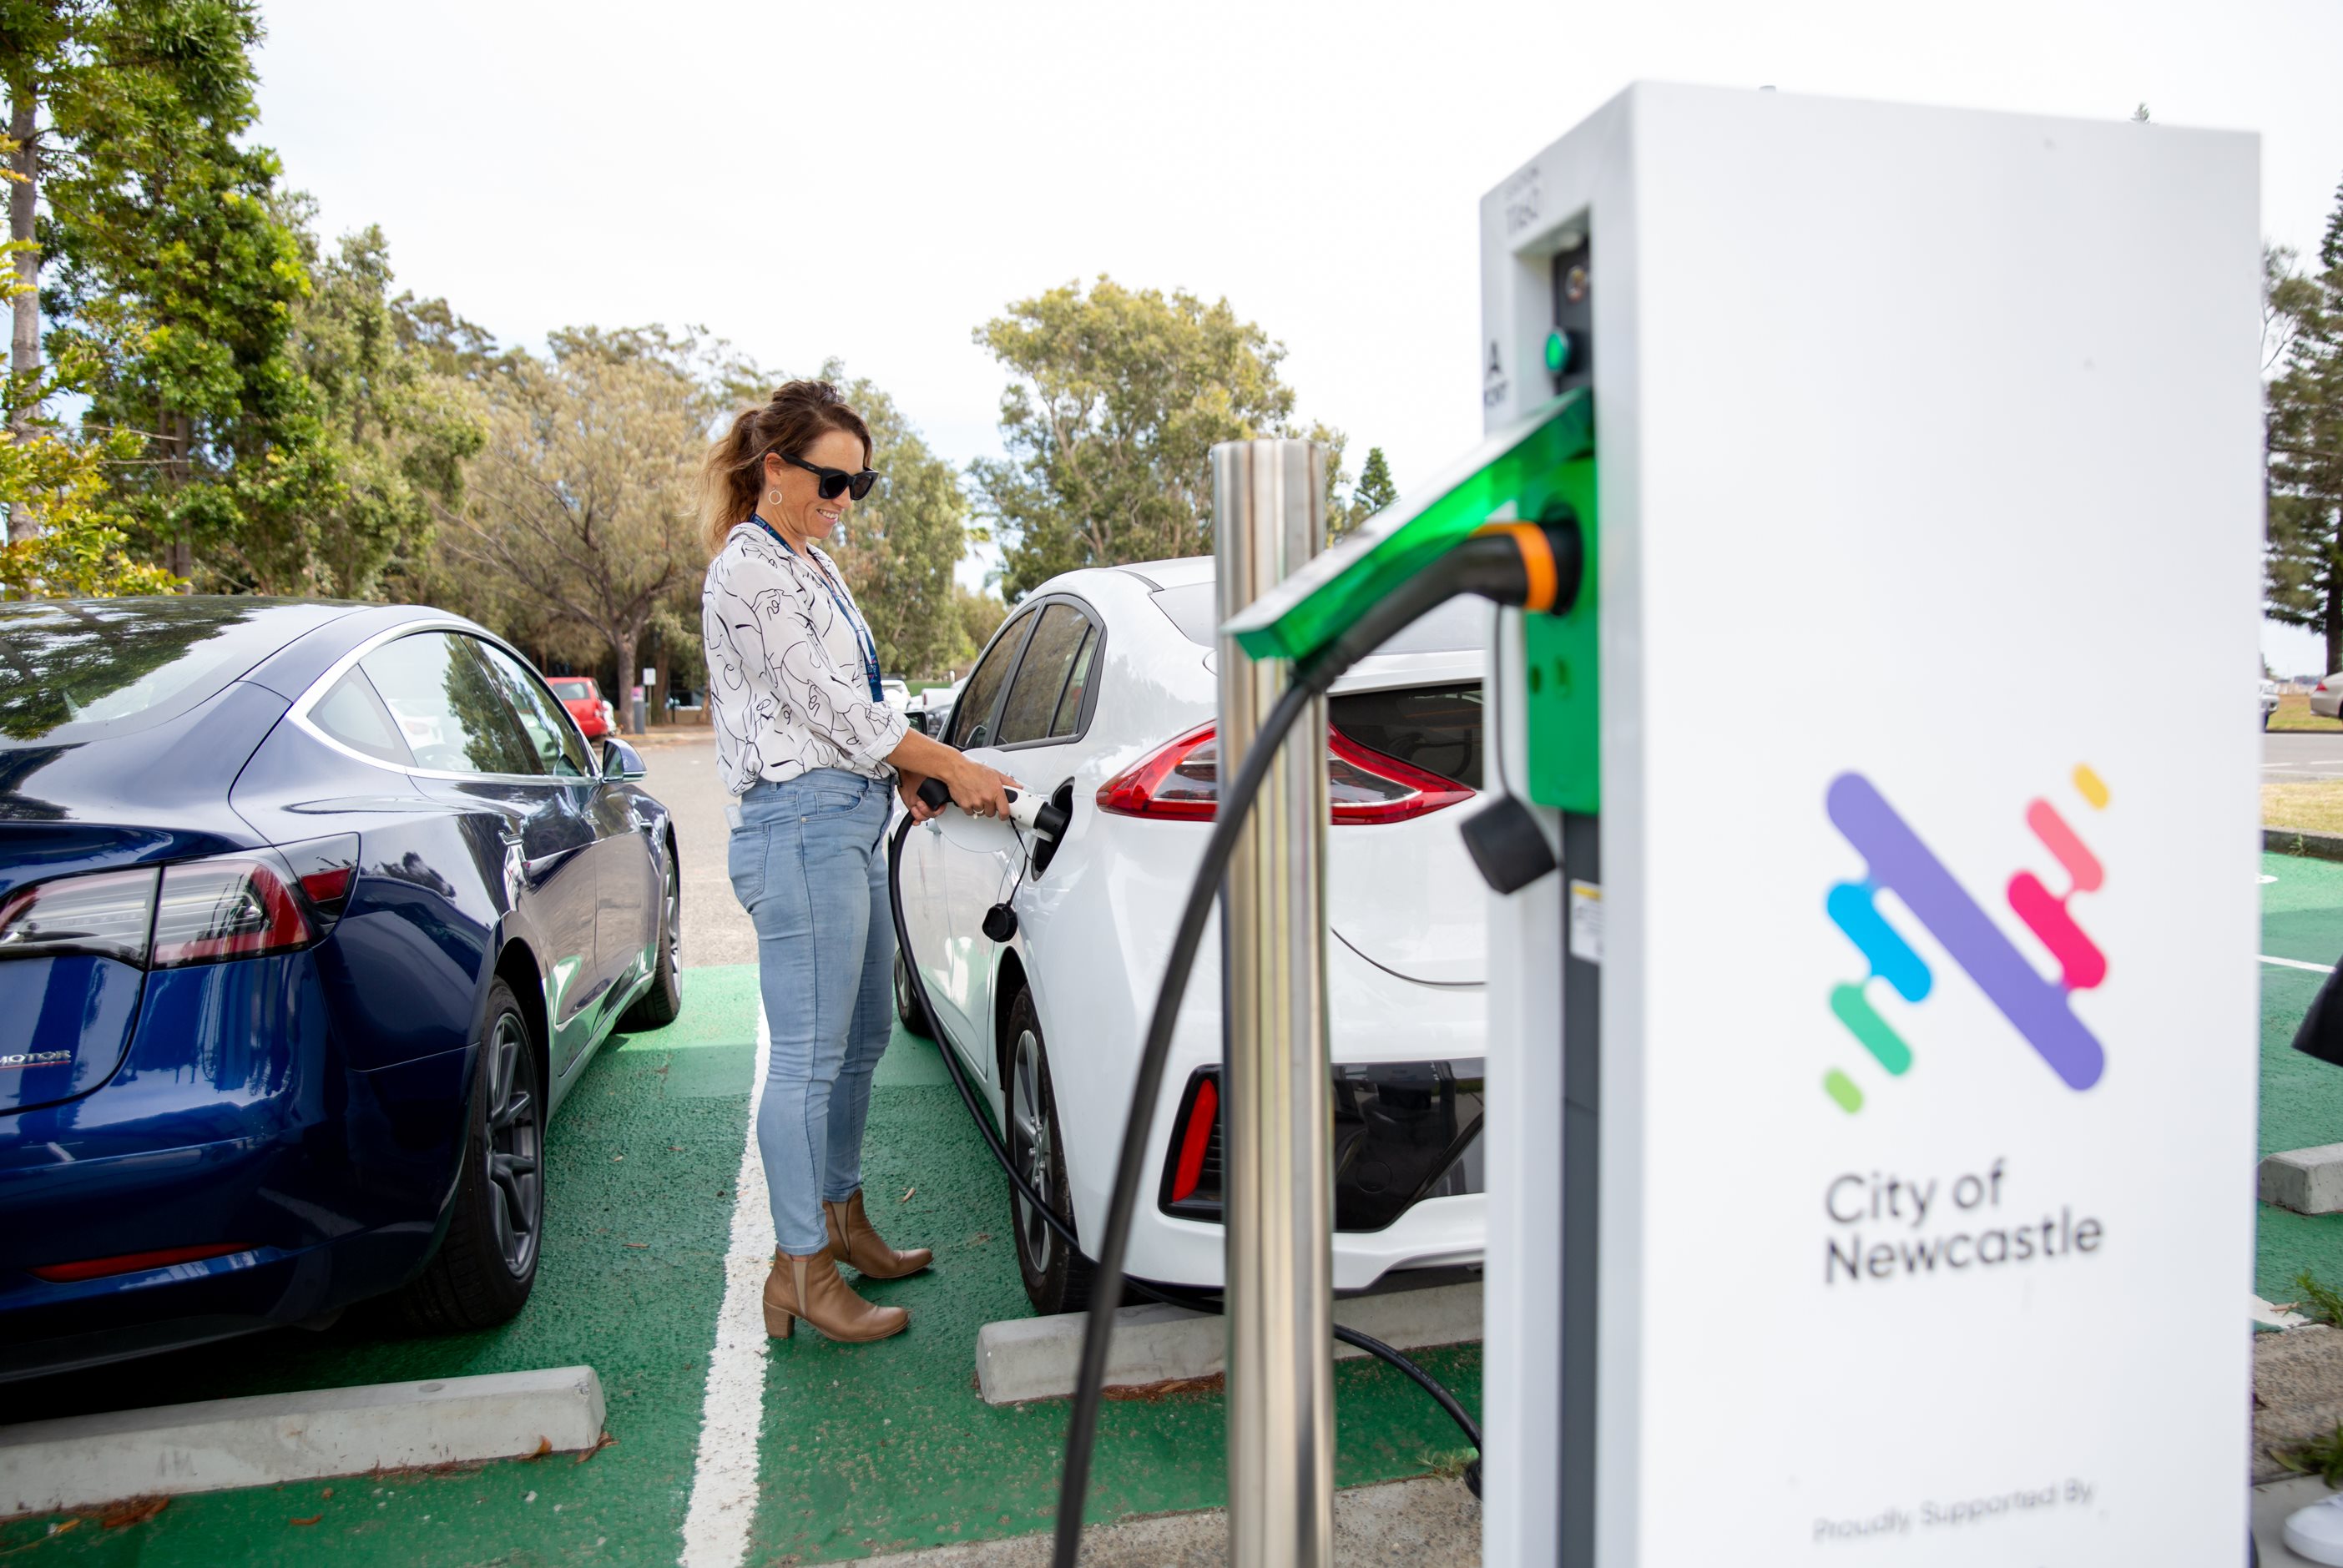 A woman charging her electric car at a newcastle charging station